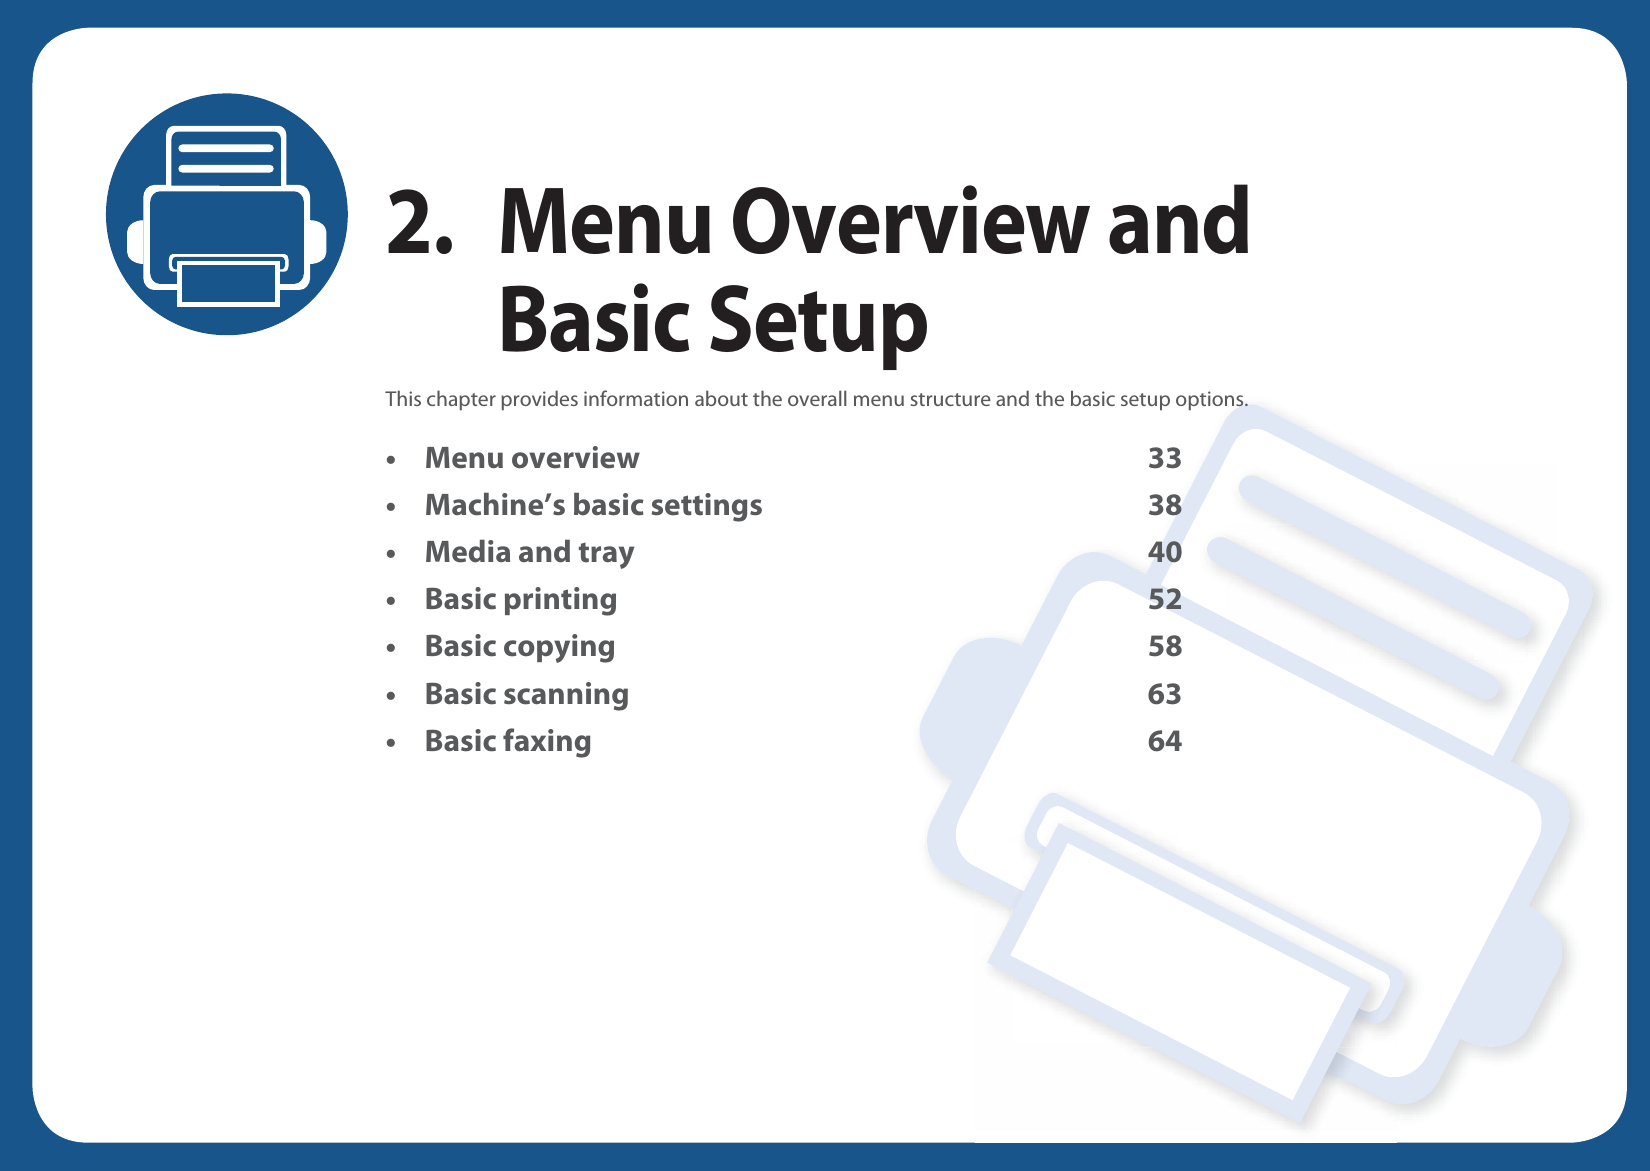 2. Menu Overview and Basic SetupThis chapter provides information about the overall menu structure and the basic setup options.• Menu overview 33• Machine’s basic settings 38• Media and tray 40• Basic printing 52• Basic copying 58• Basic scanning 63• Basic faxing 64